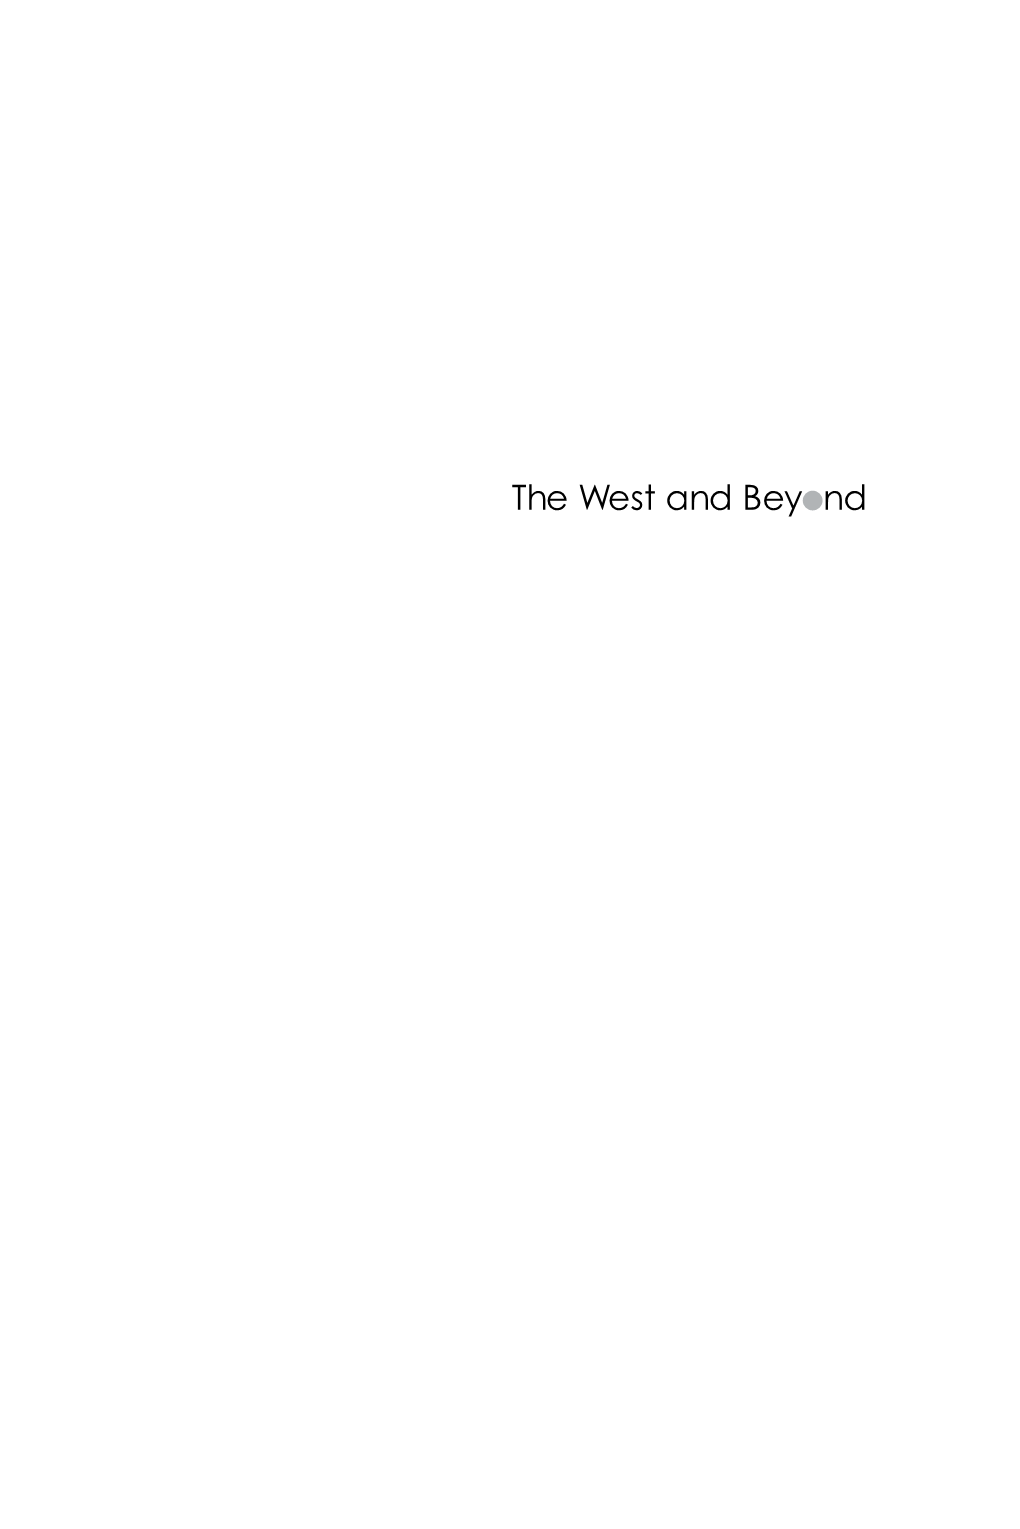 The West Unbound: Social and Cultural Studies Series Editors: Alvin Finkel and Sarah Carter